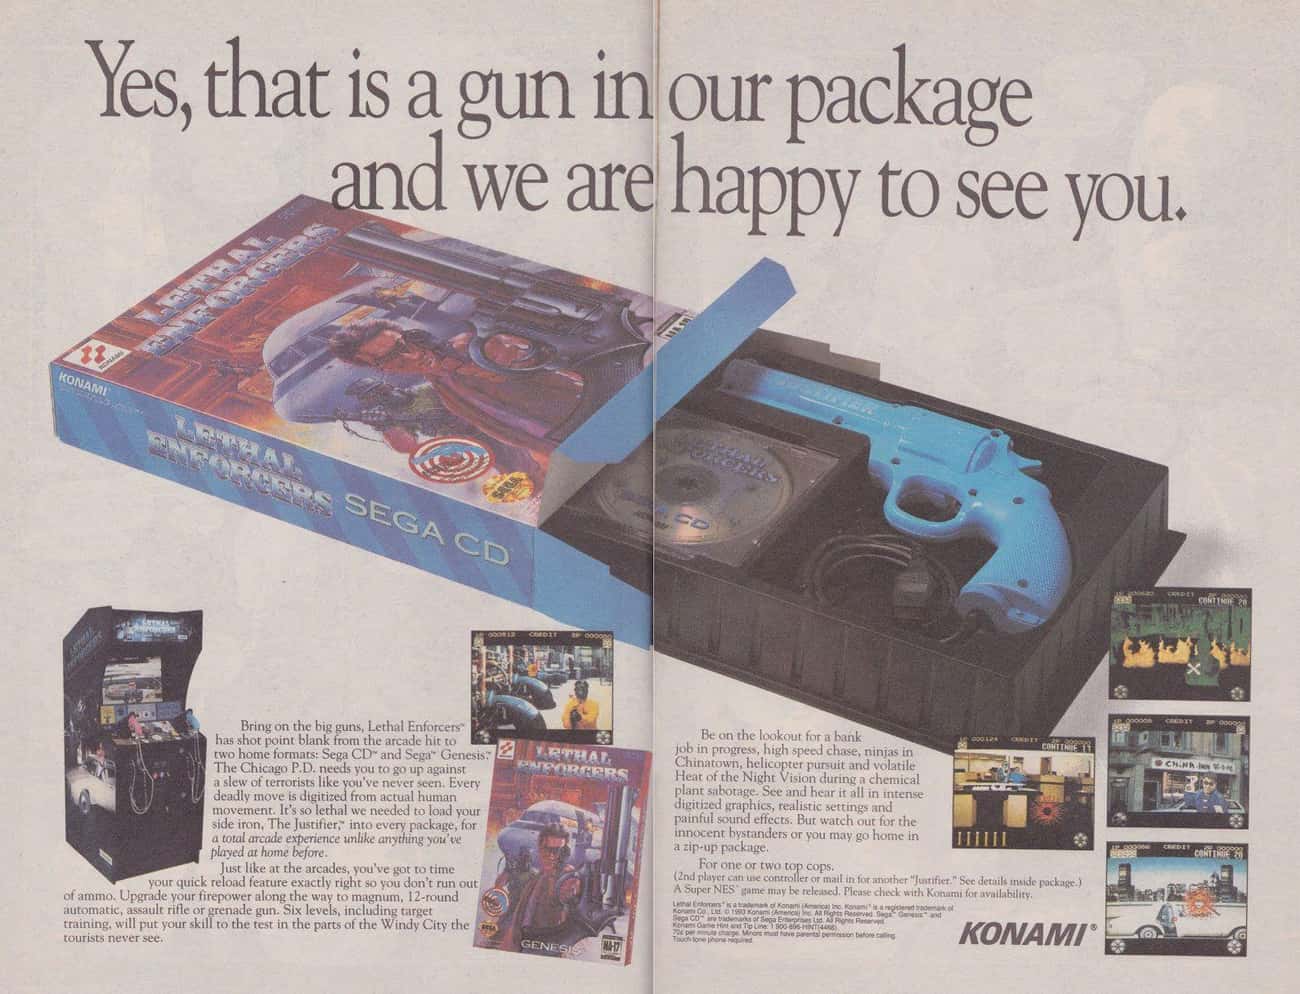 Vintage Gaming Ads - weird old gaming ads - Yes, that is a gun in our package and we are happy to see you. Konami Lazar Enforcers Sega Cd Contimie 20 000 Lpa Onet Continie Bring on the big guns, Lethal Enforcers has shot point blank from the arcade hit to